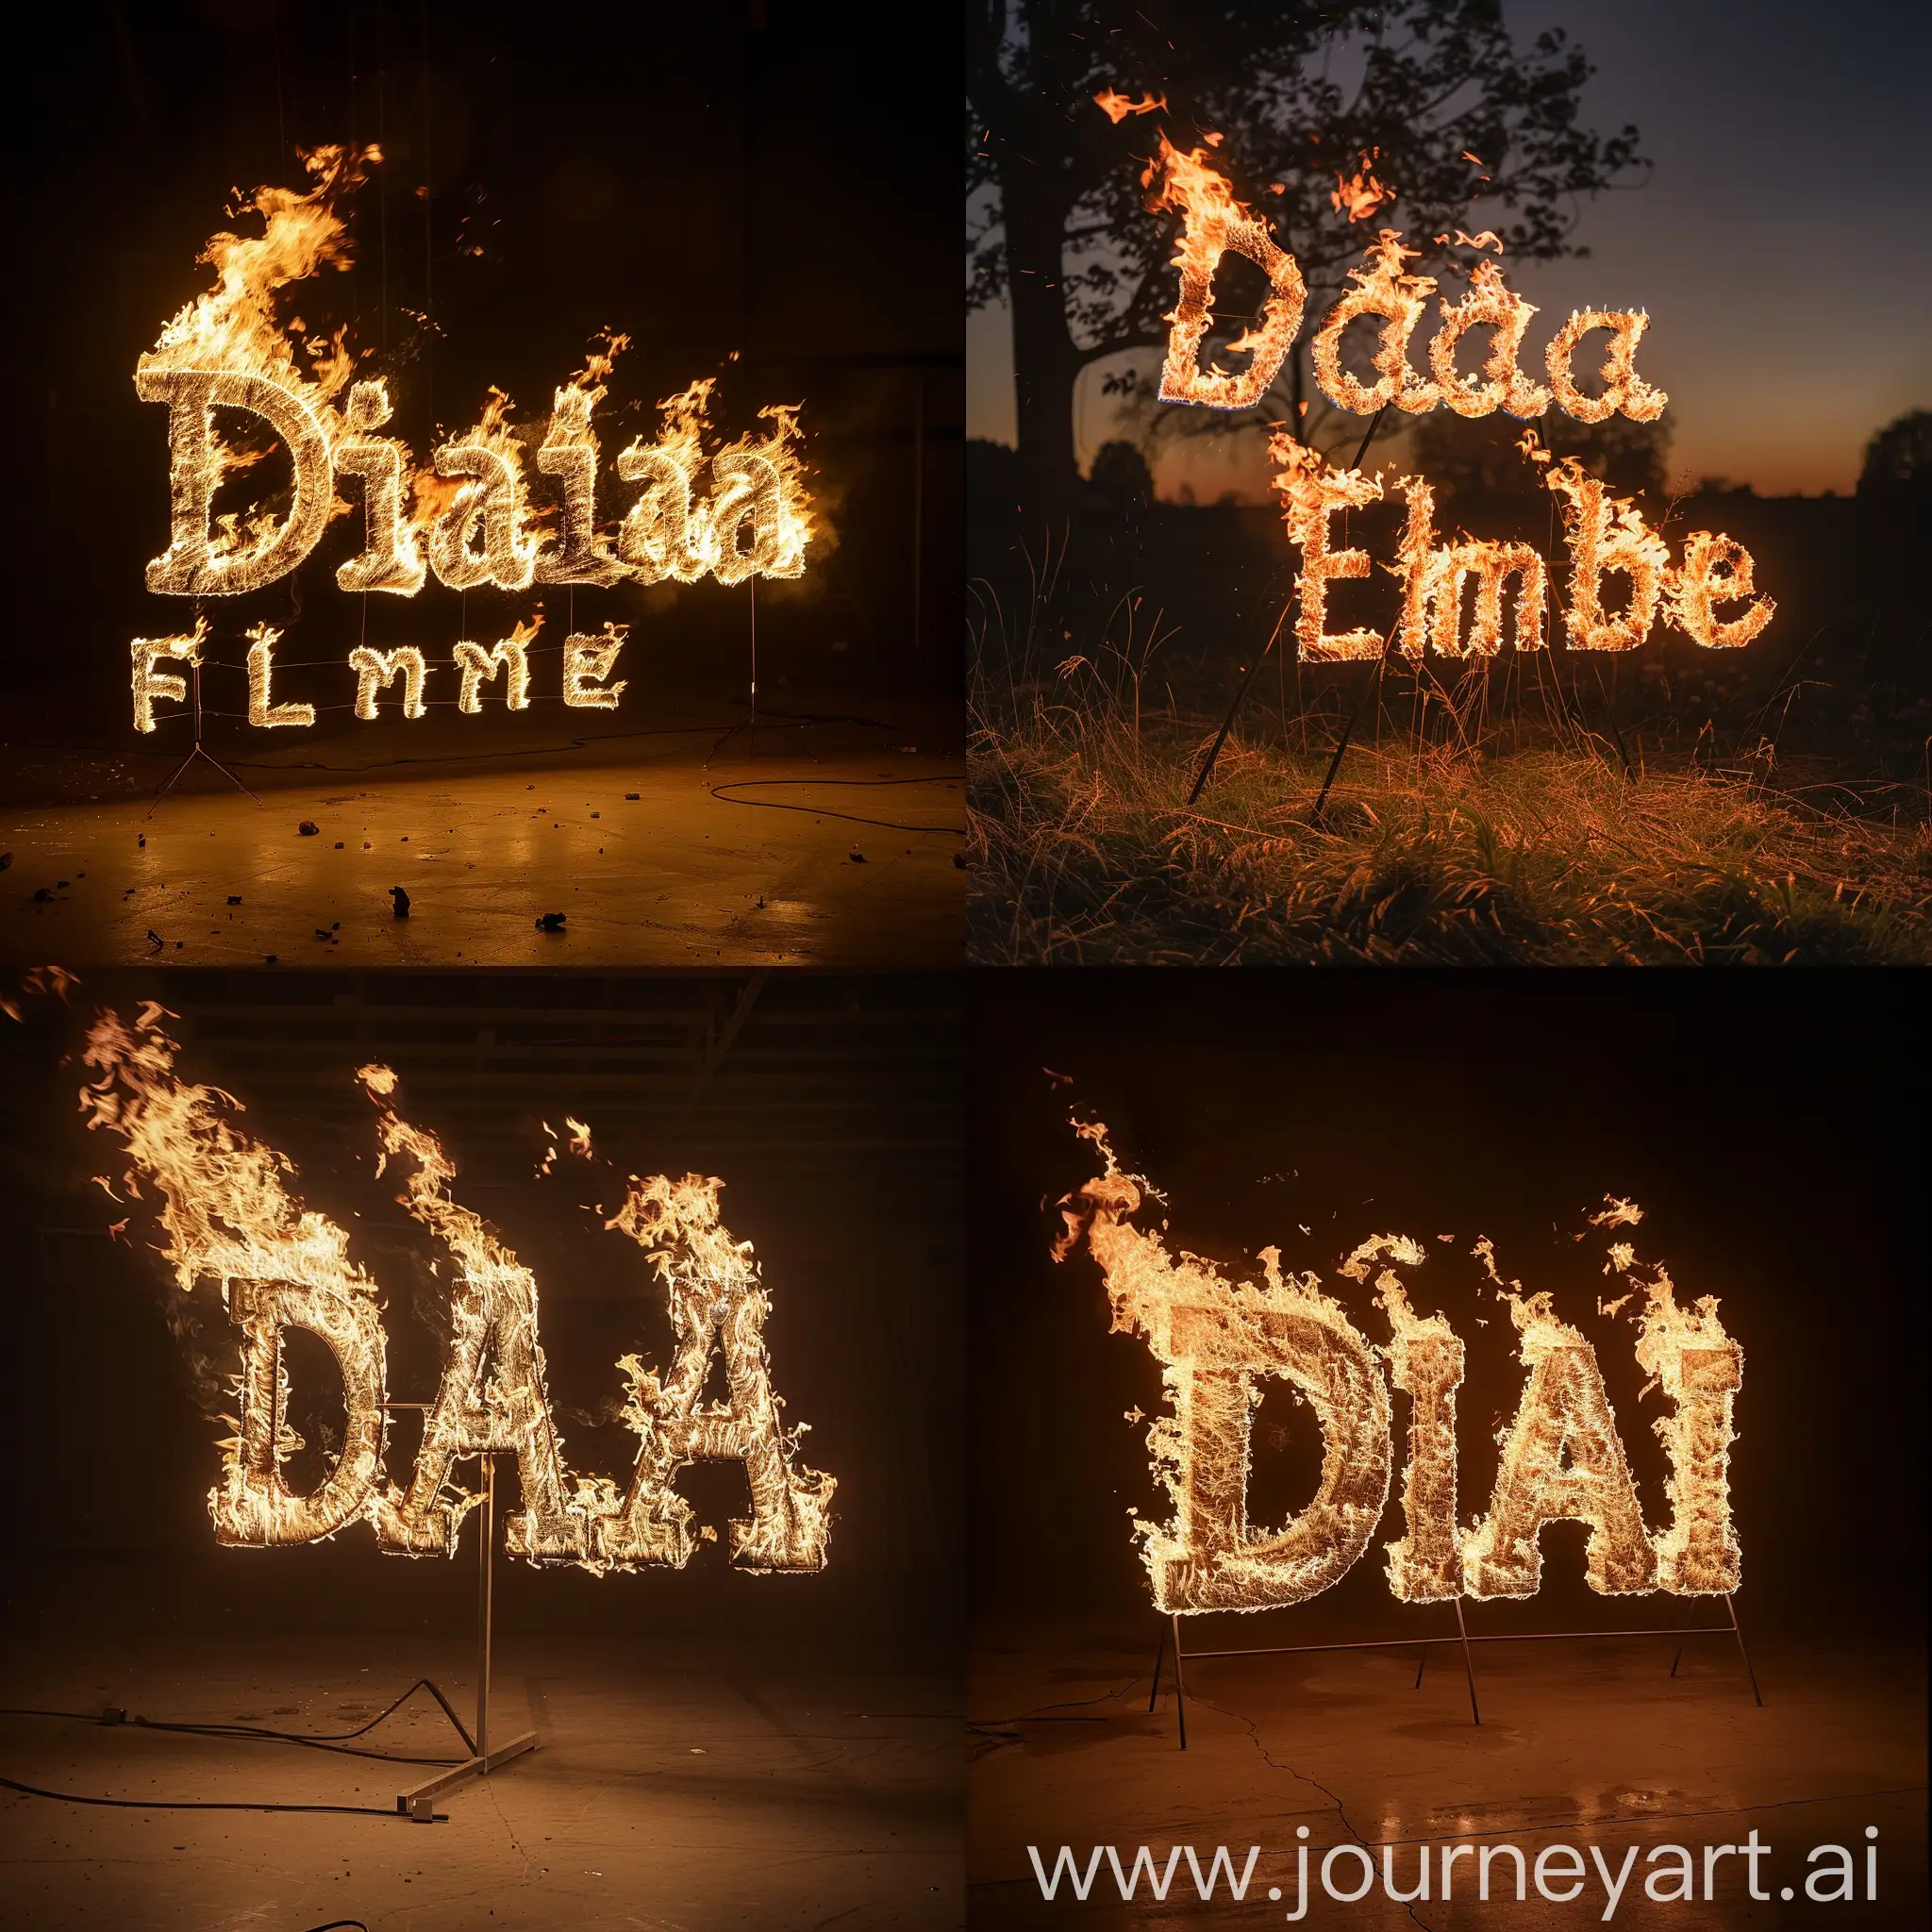 take a picture with letters "Diana Flambe" with fire